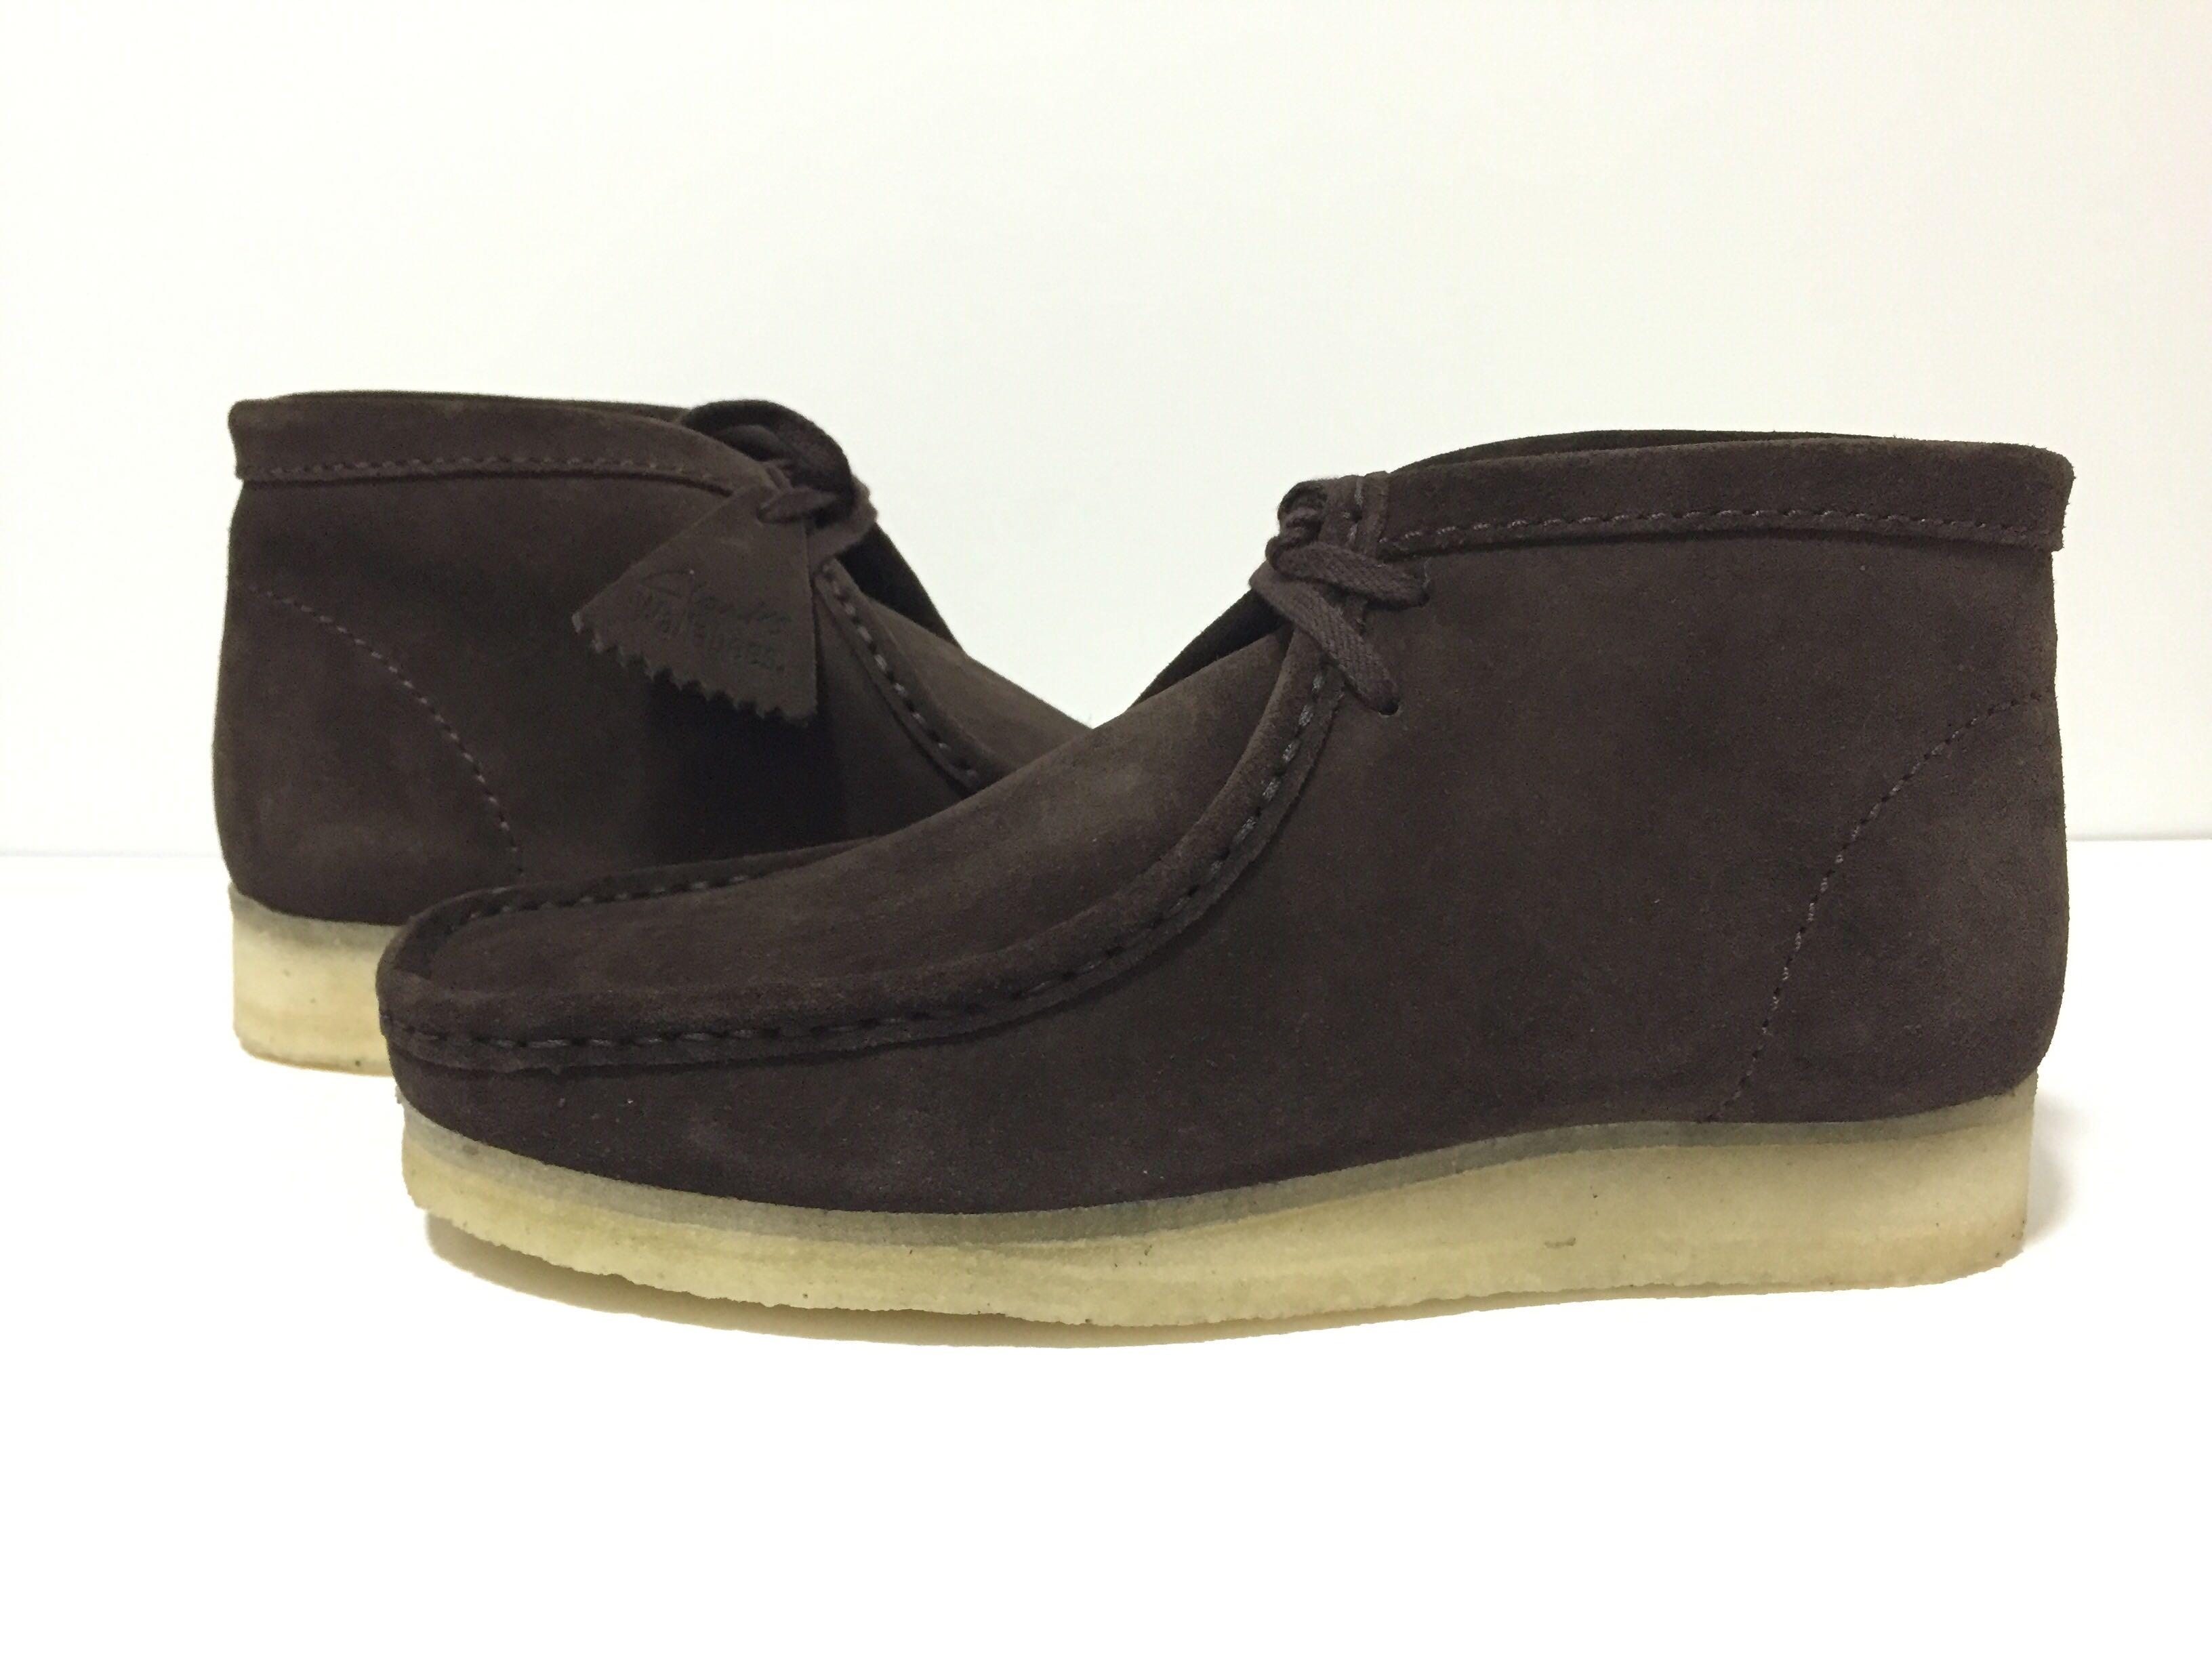 wallabee clarks boots